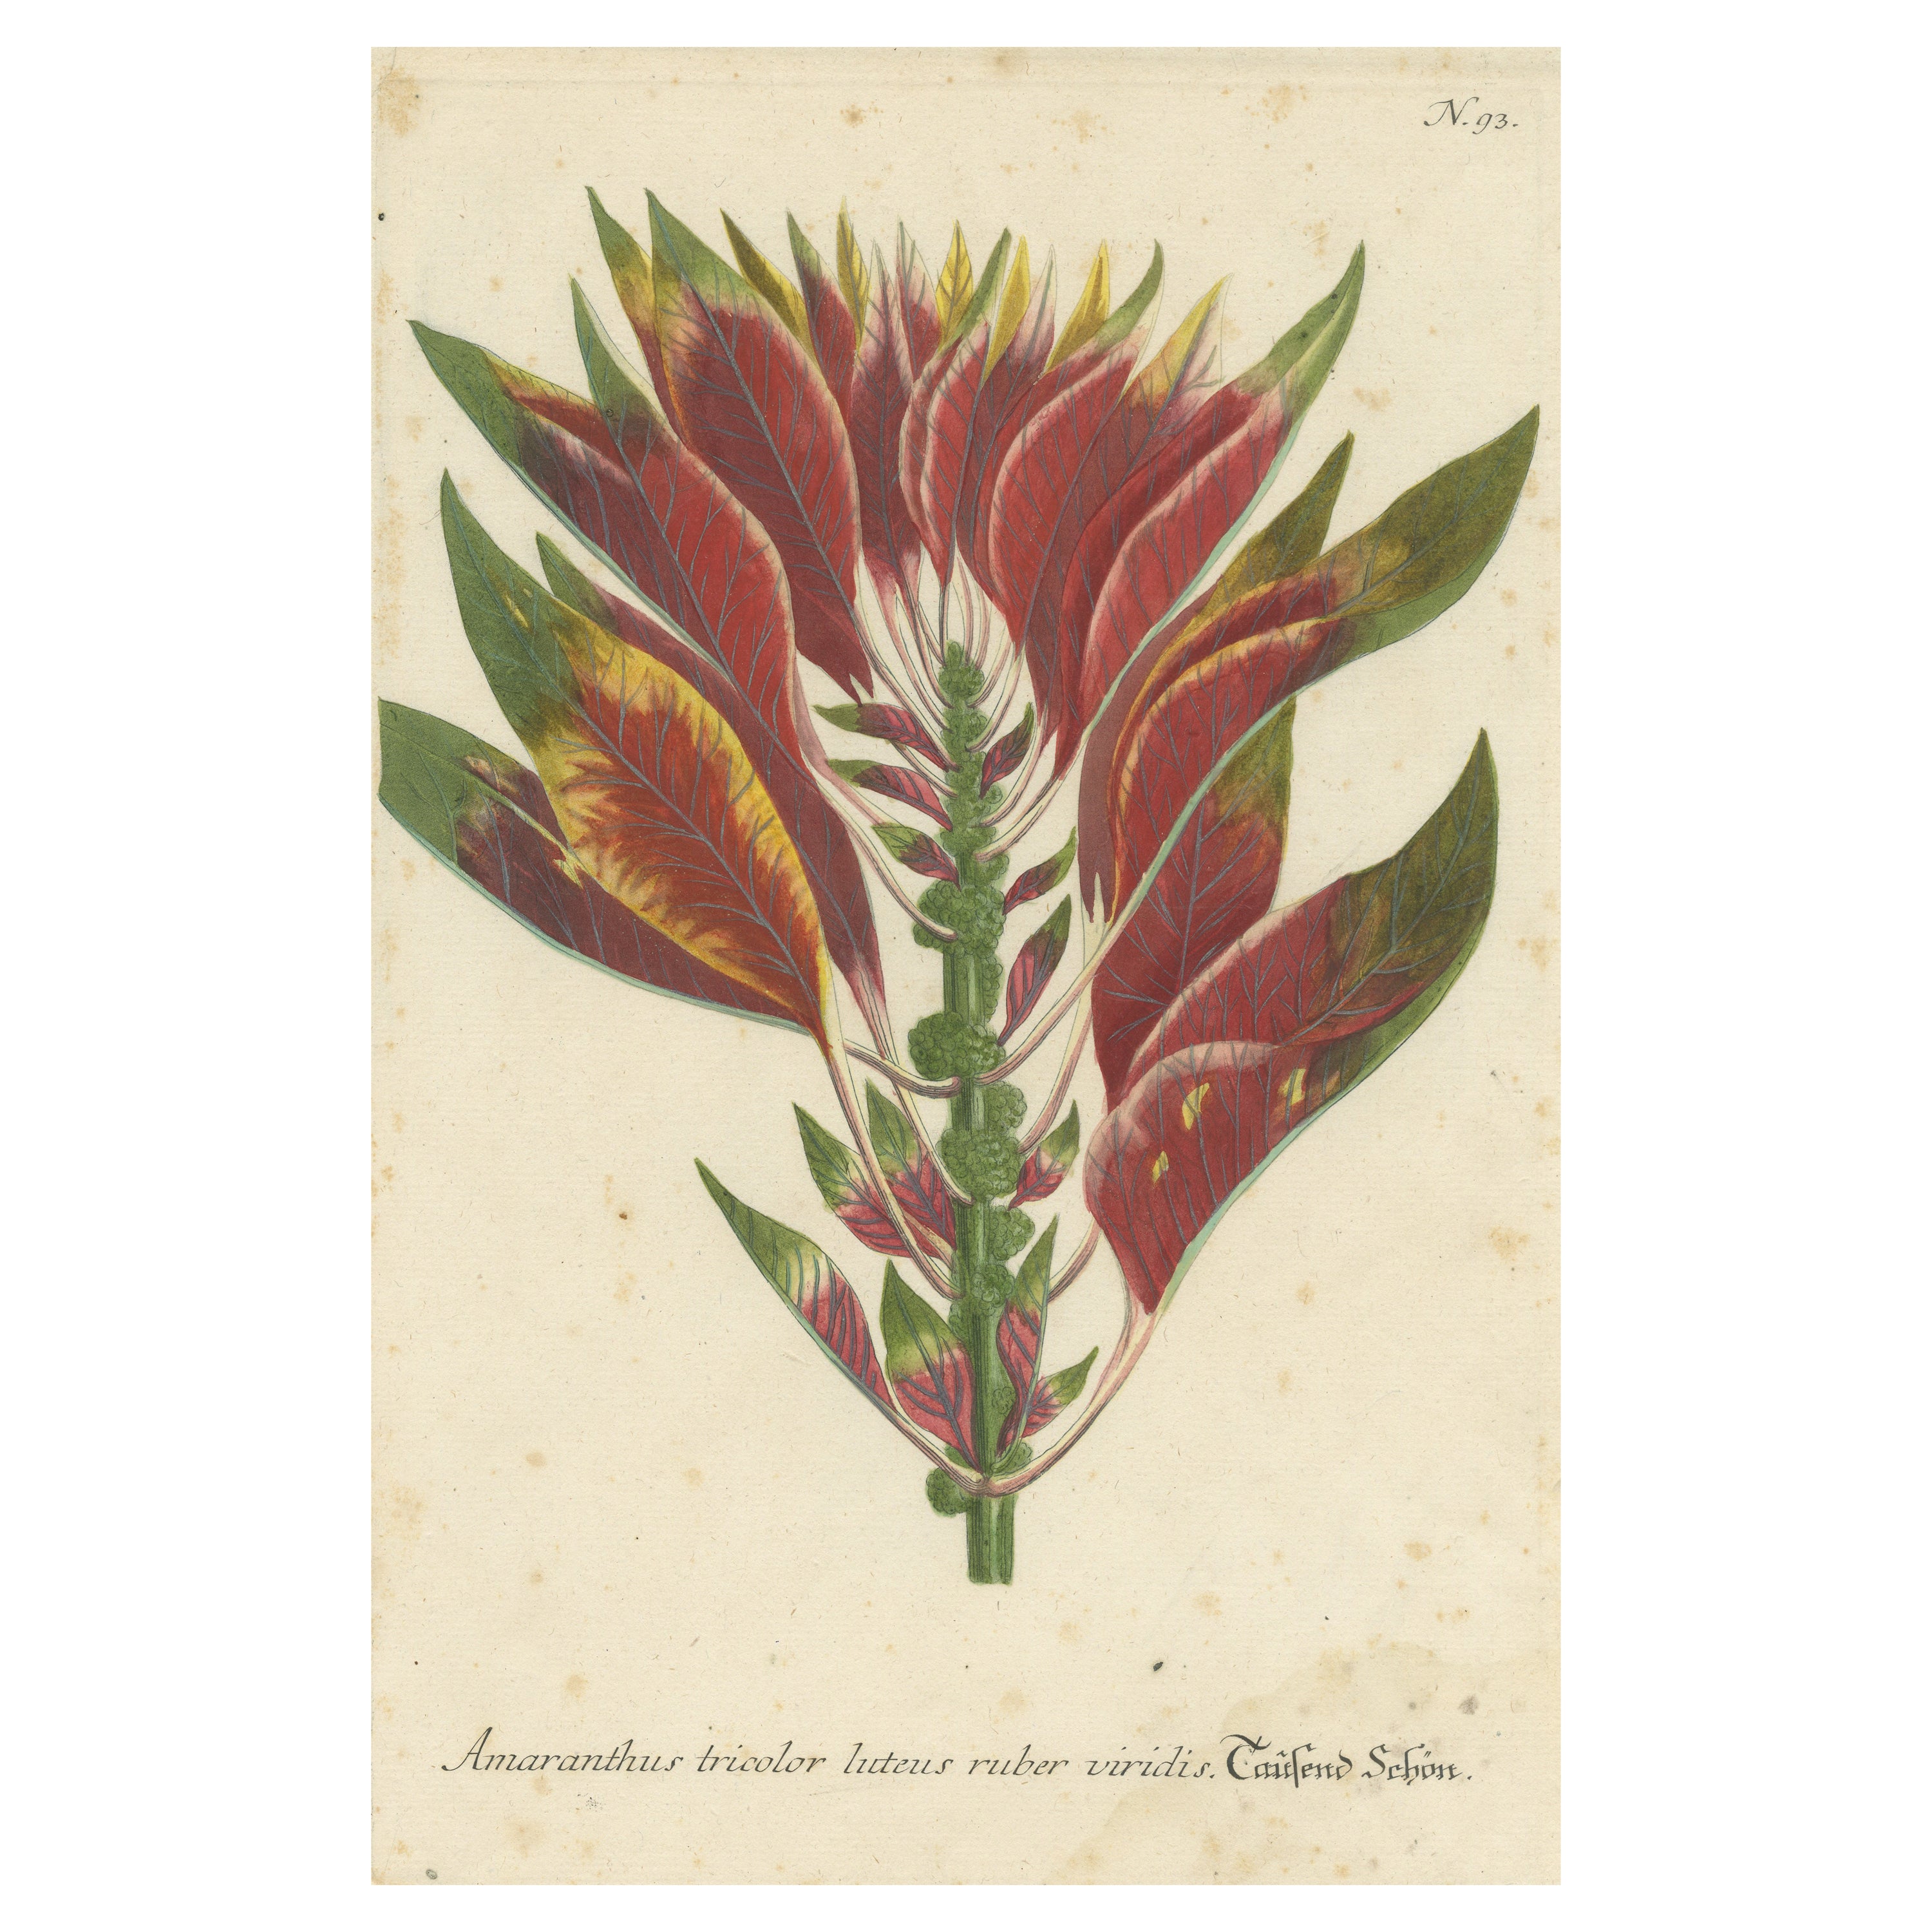 Hand-finished Mezzotint Engraving of Amaranthus Tricolor